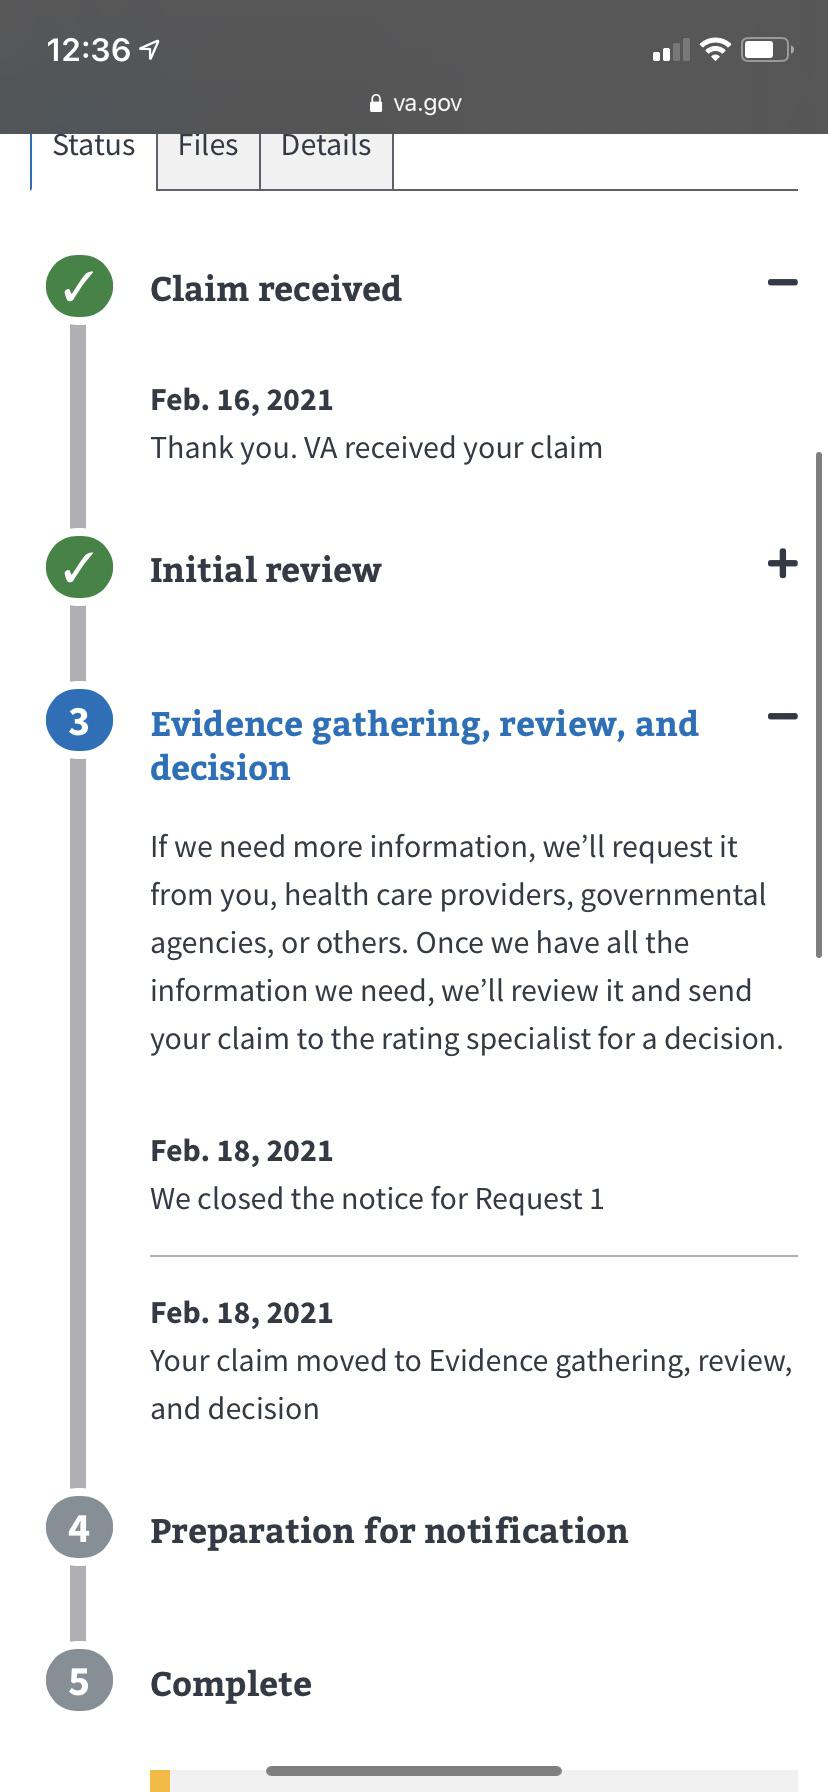 what does it mean when the va says we closed the notice for request 3